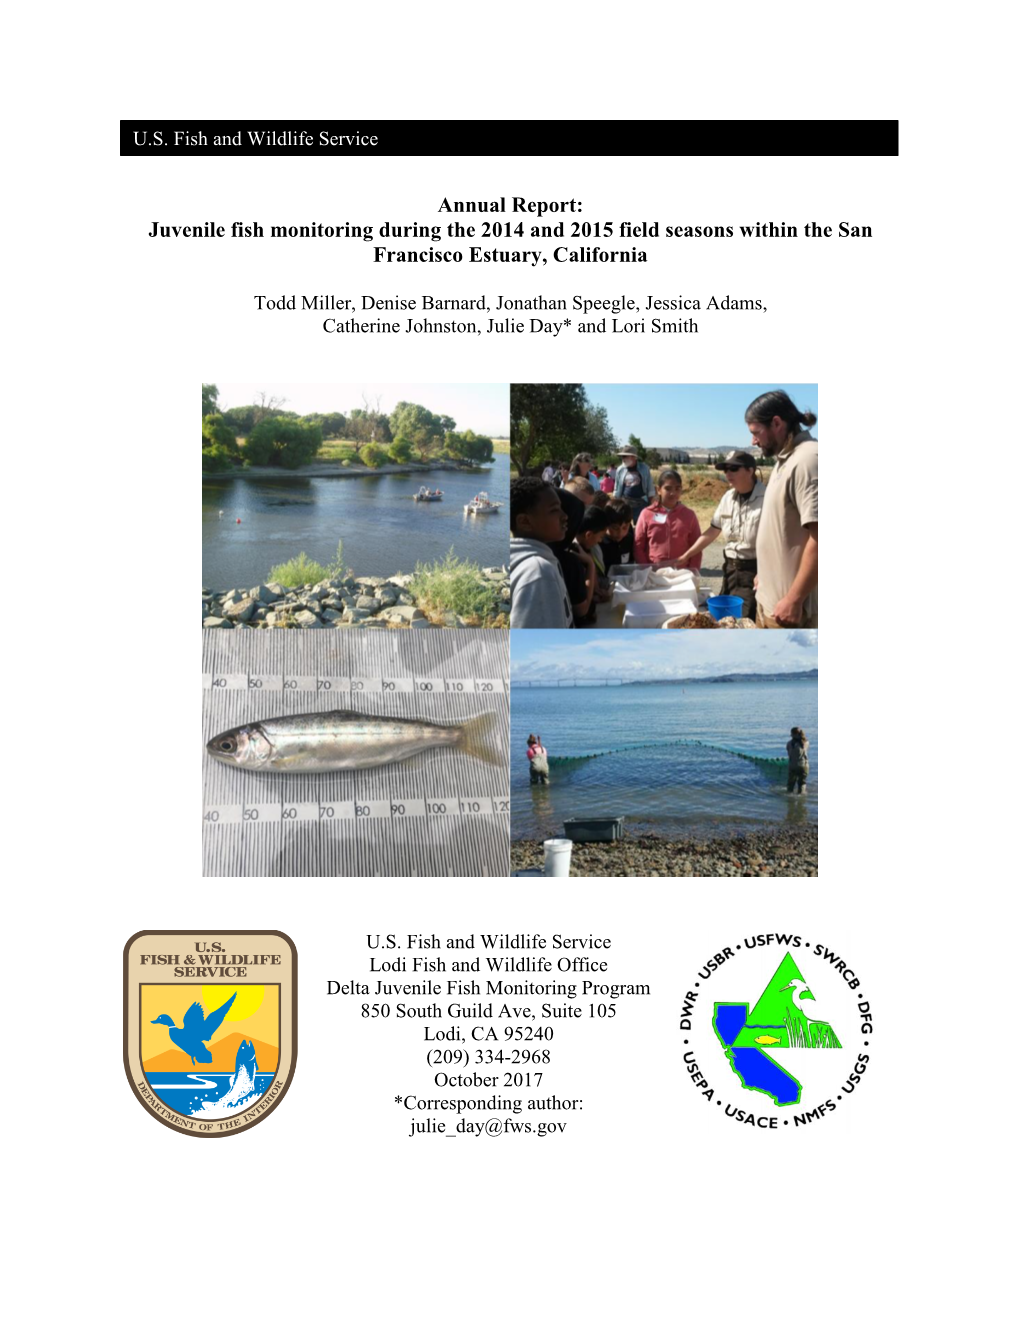 Juvenile Fish Monitoring During the 2014 and 2015 Field Seasons Within the San Francisco Estuary, California